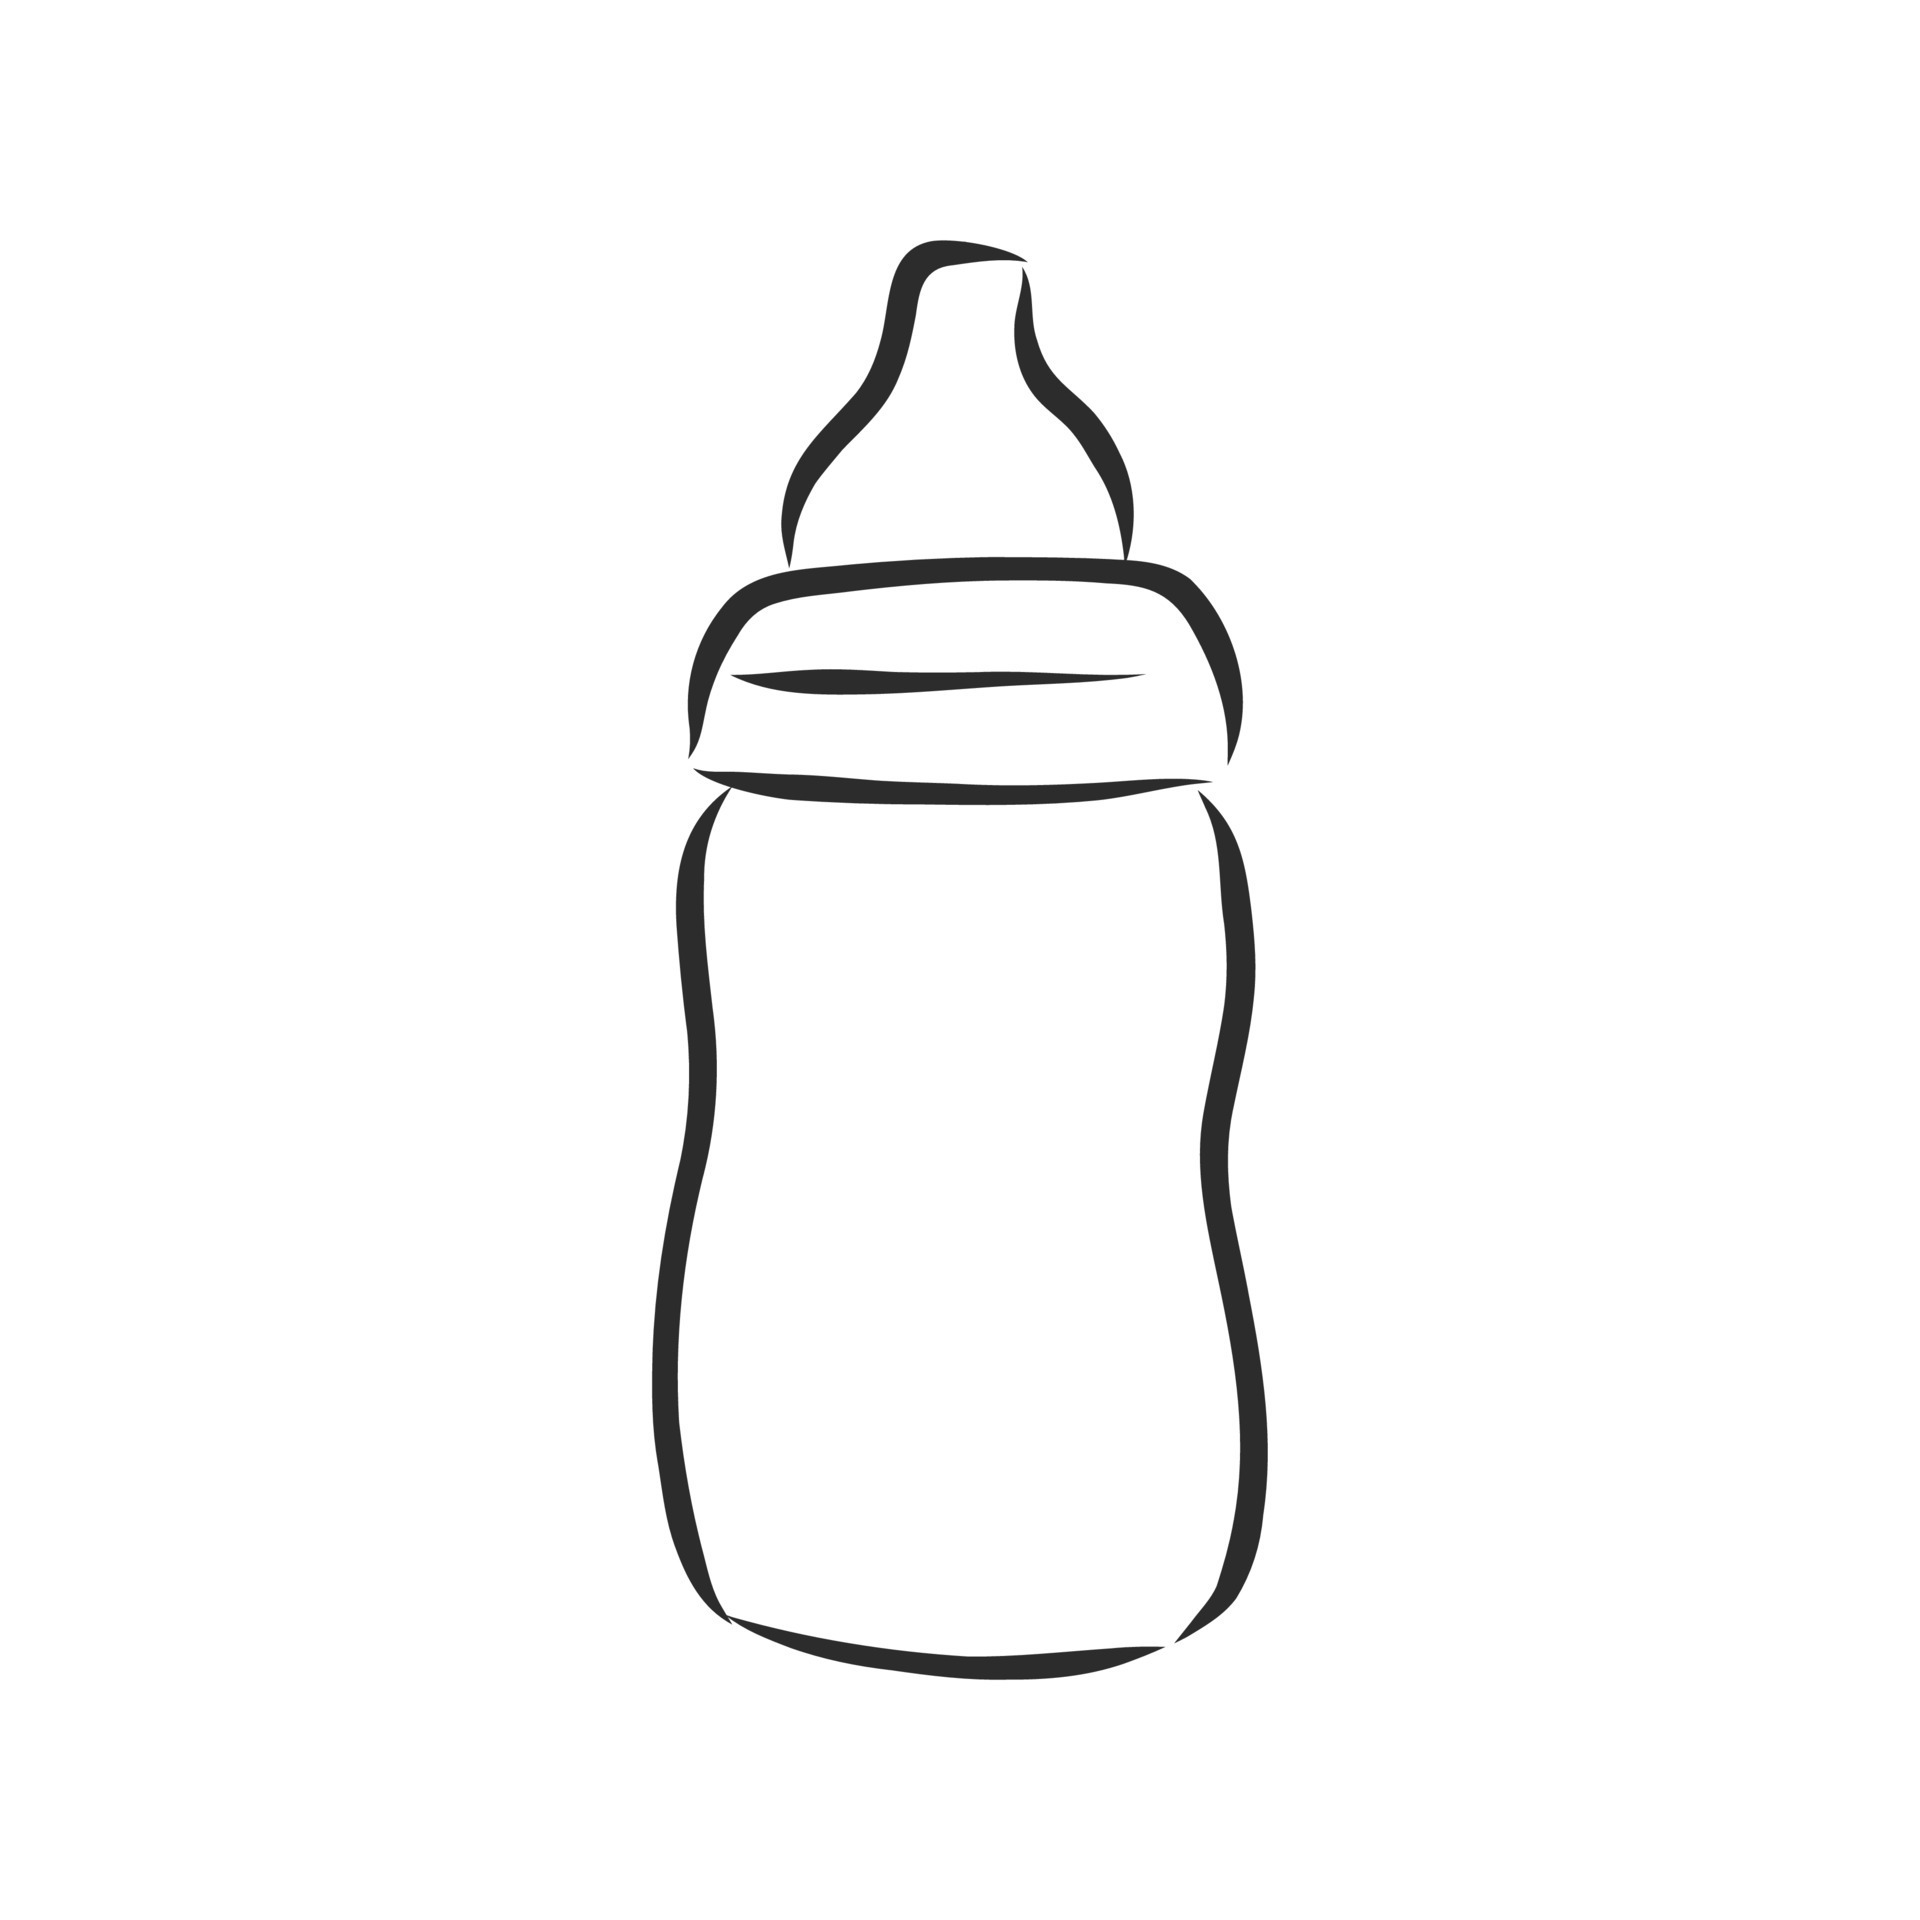 Drawing cartoon smiling baby with a bottle of milk